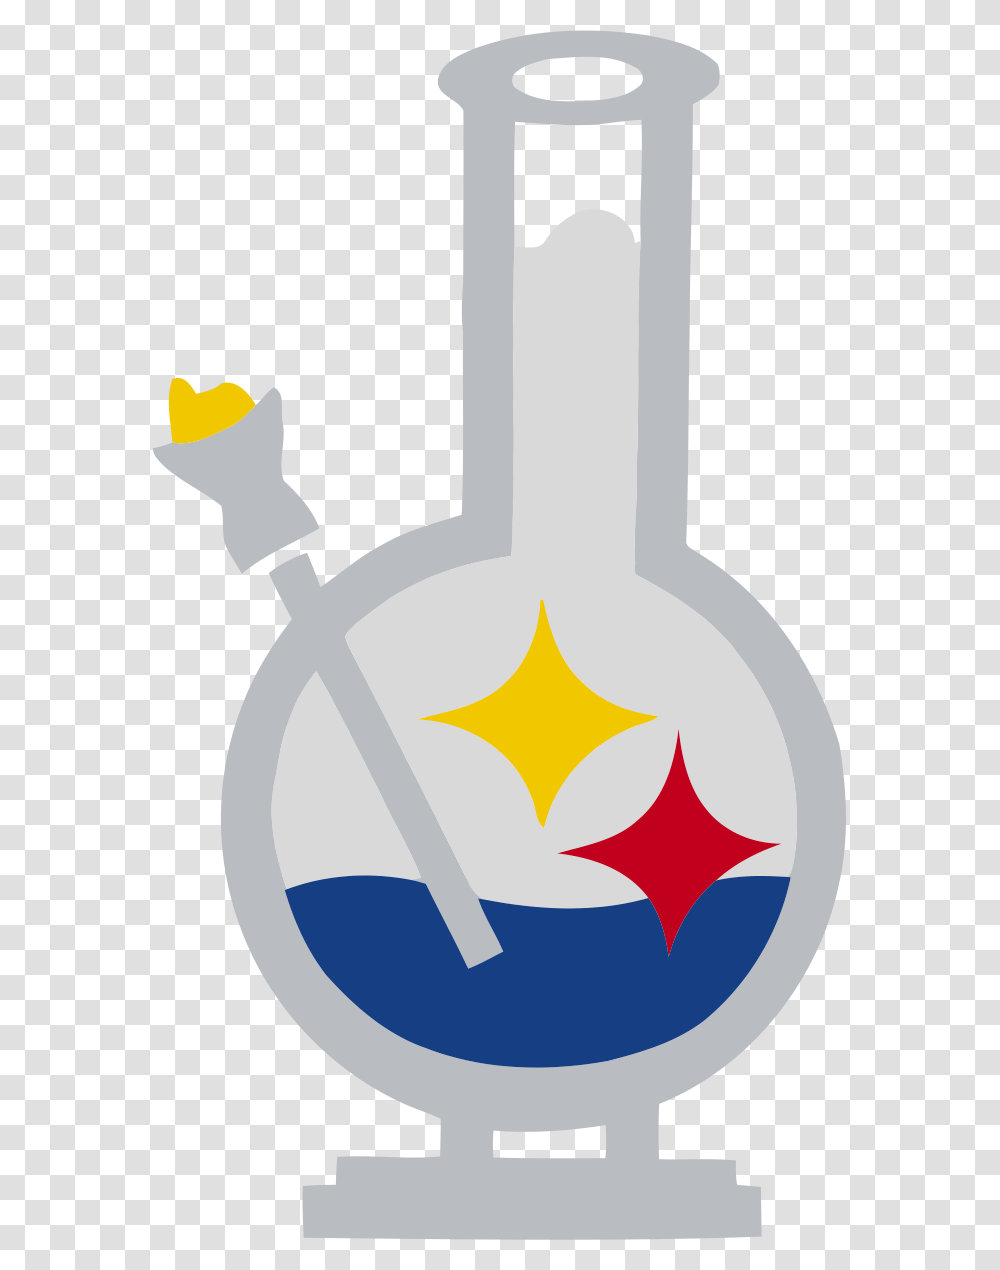 Iron On Stickers Logos And Uniforms Of The Pittsburgh Steelers, Light, Shovel, Tool Transparent Png